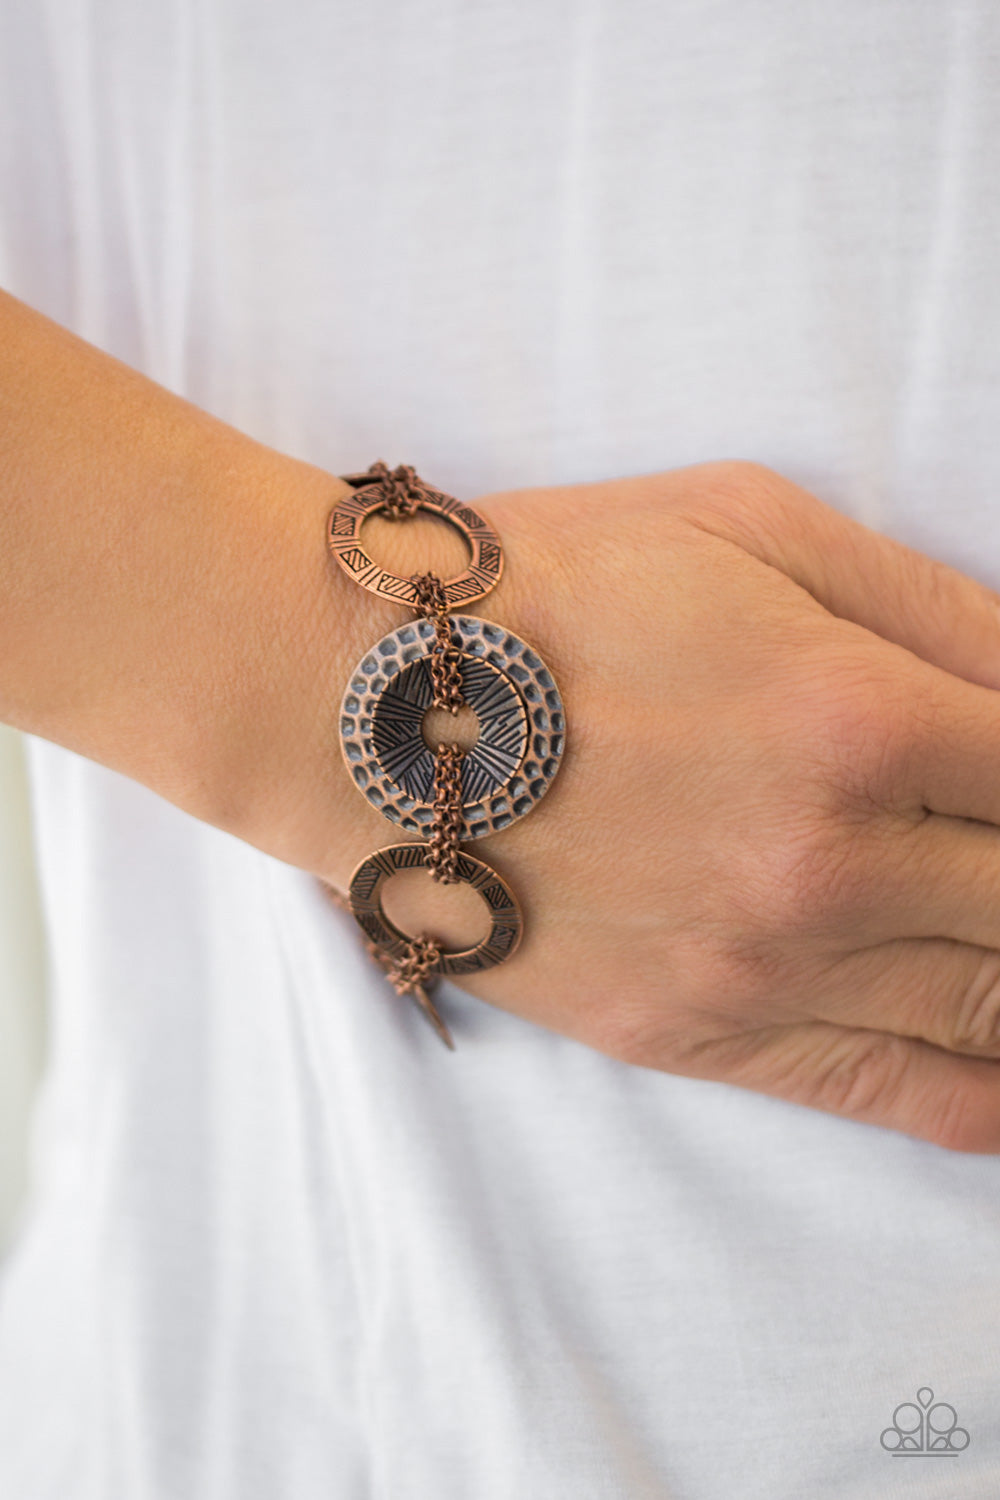 Paparazzi Way Wild - Copper - Stamped and Hammered - Shimmery Copper Bracelet - $5 Jewelry With Ashley Swint